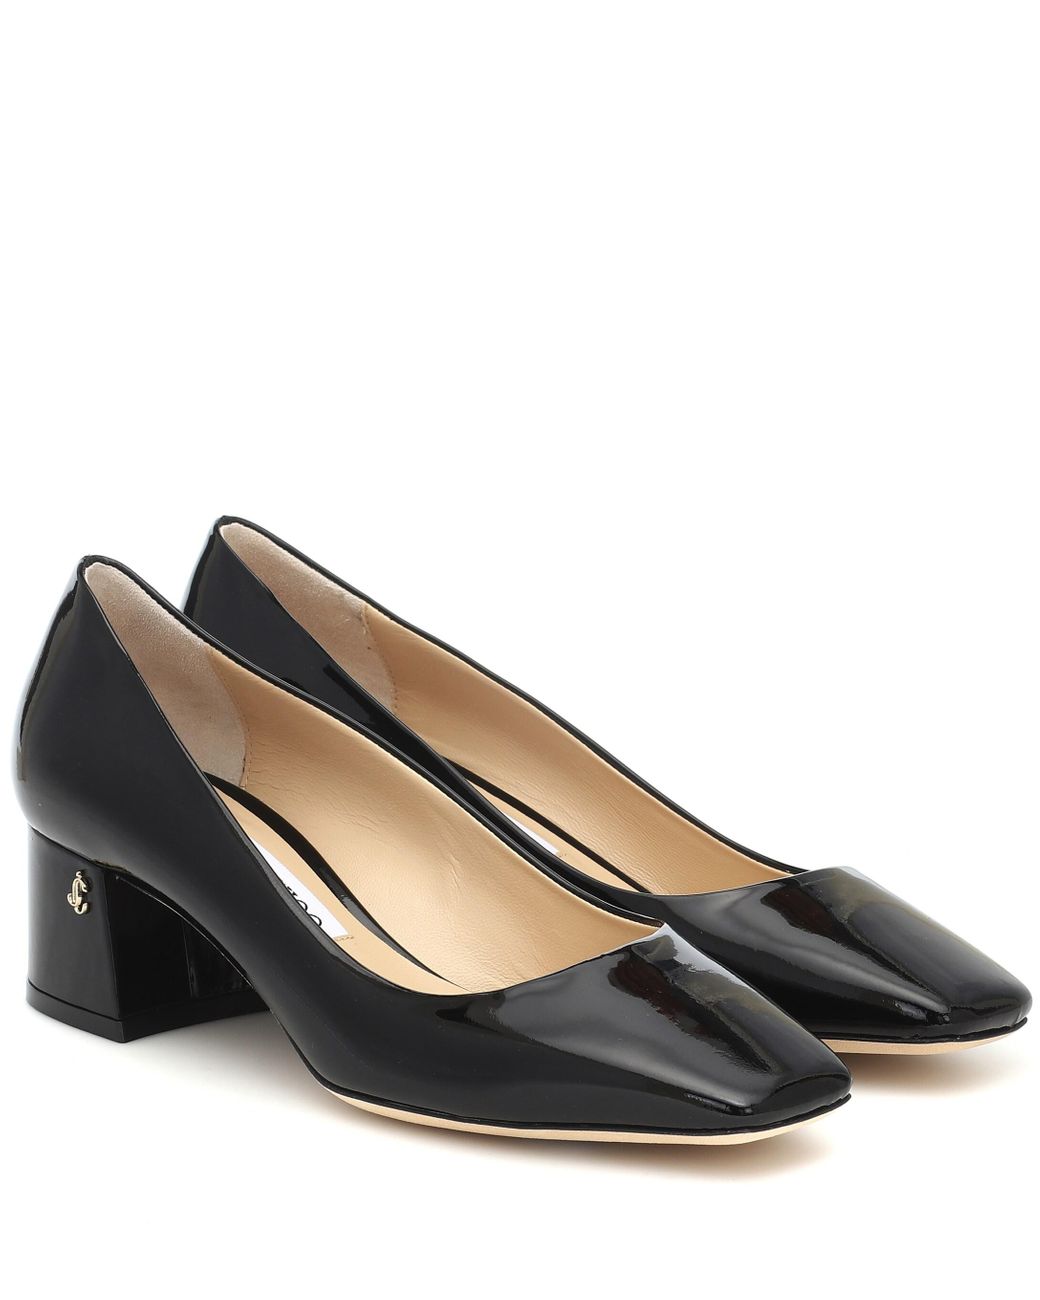 Jimmy Choo Dianne 45 Patent Leather Pumps in Black | Lyst